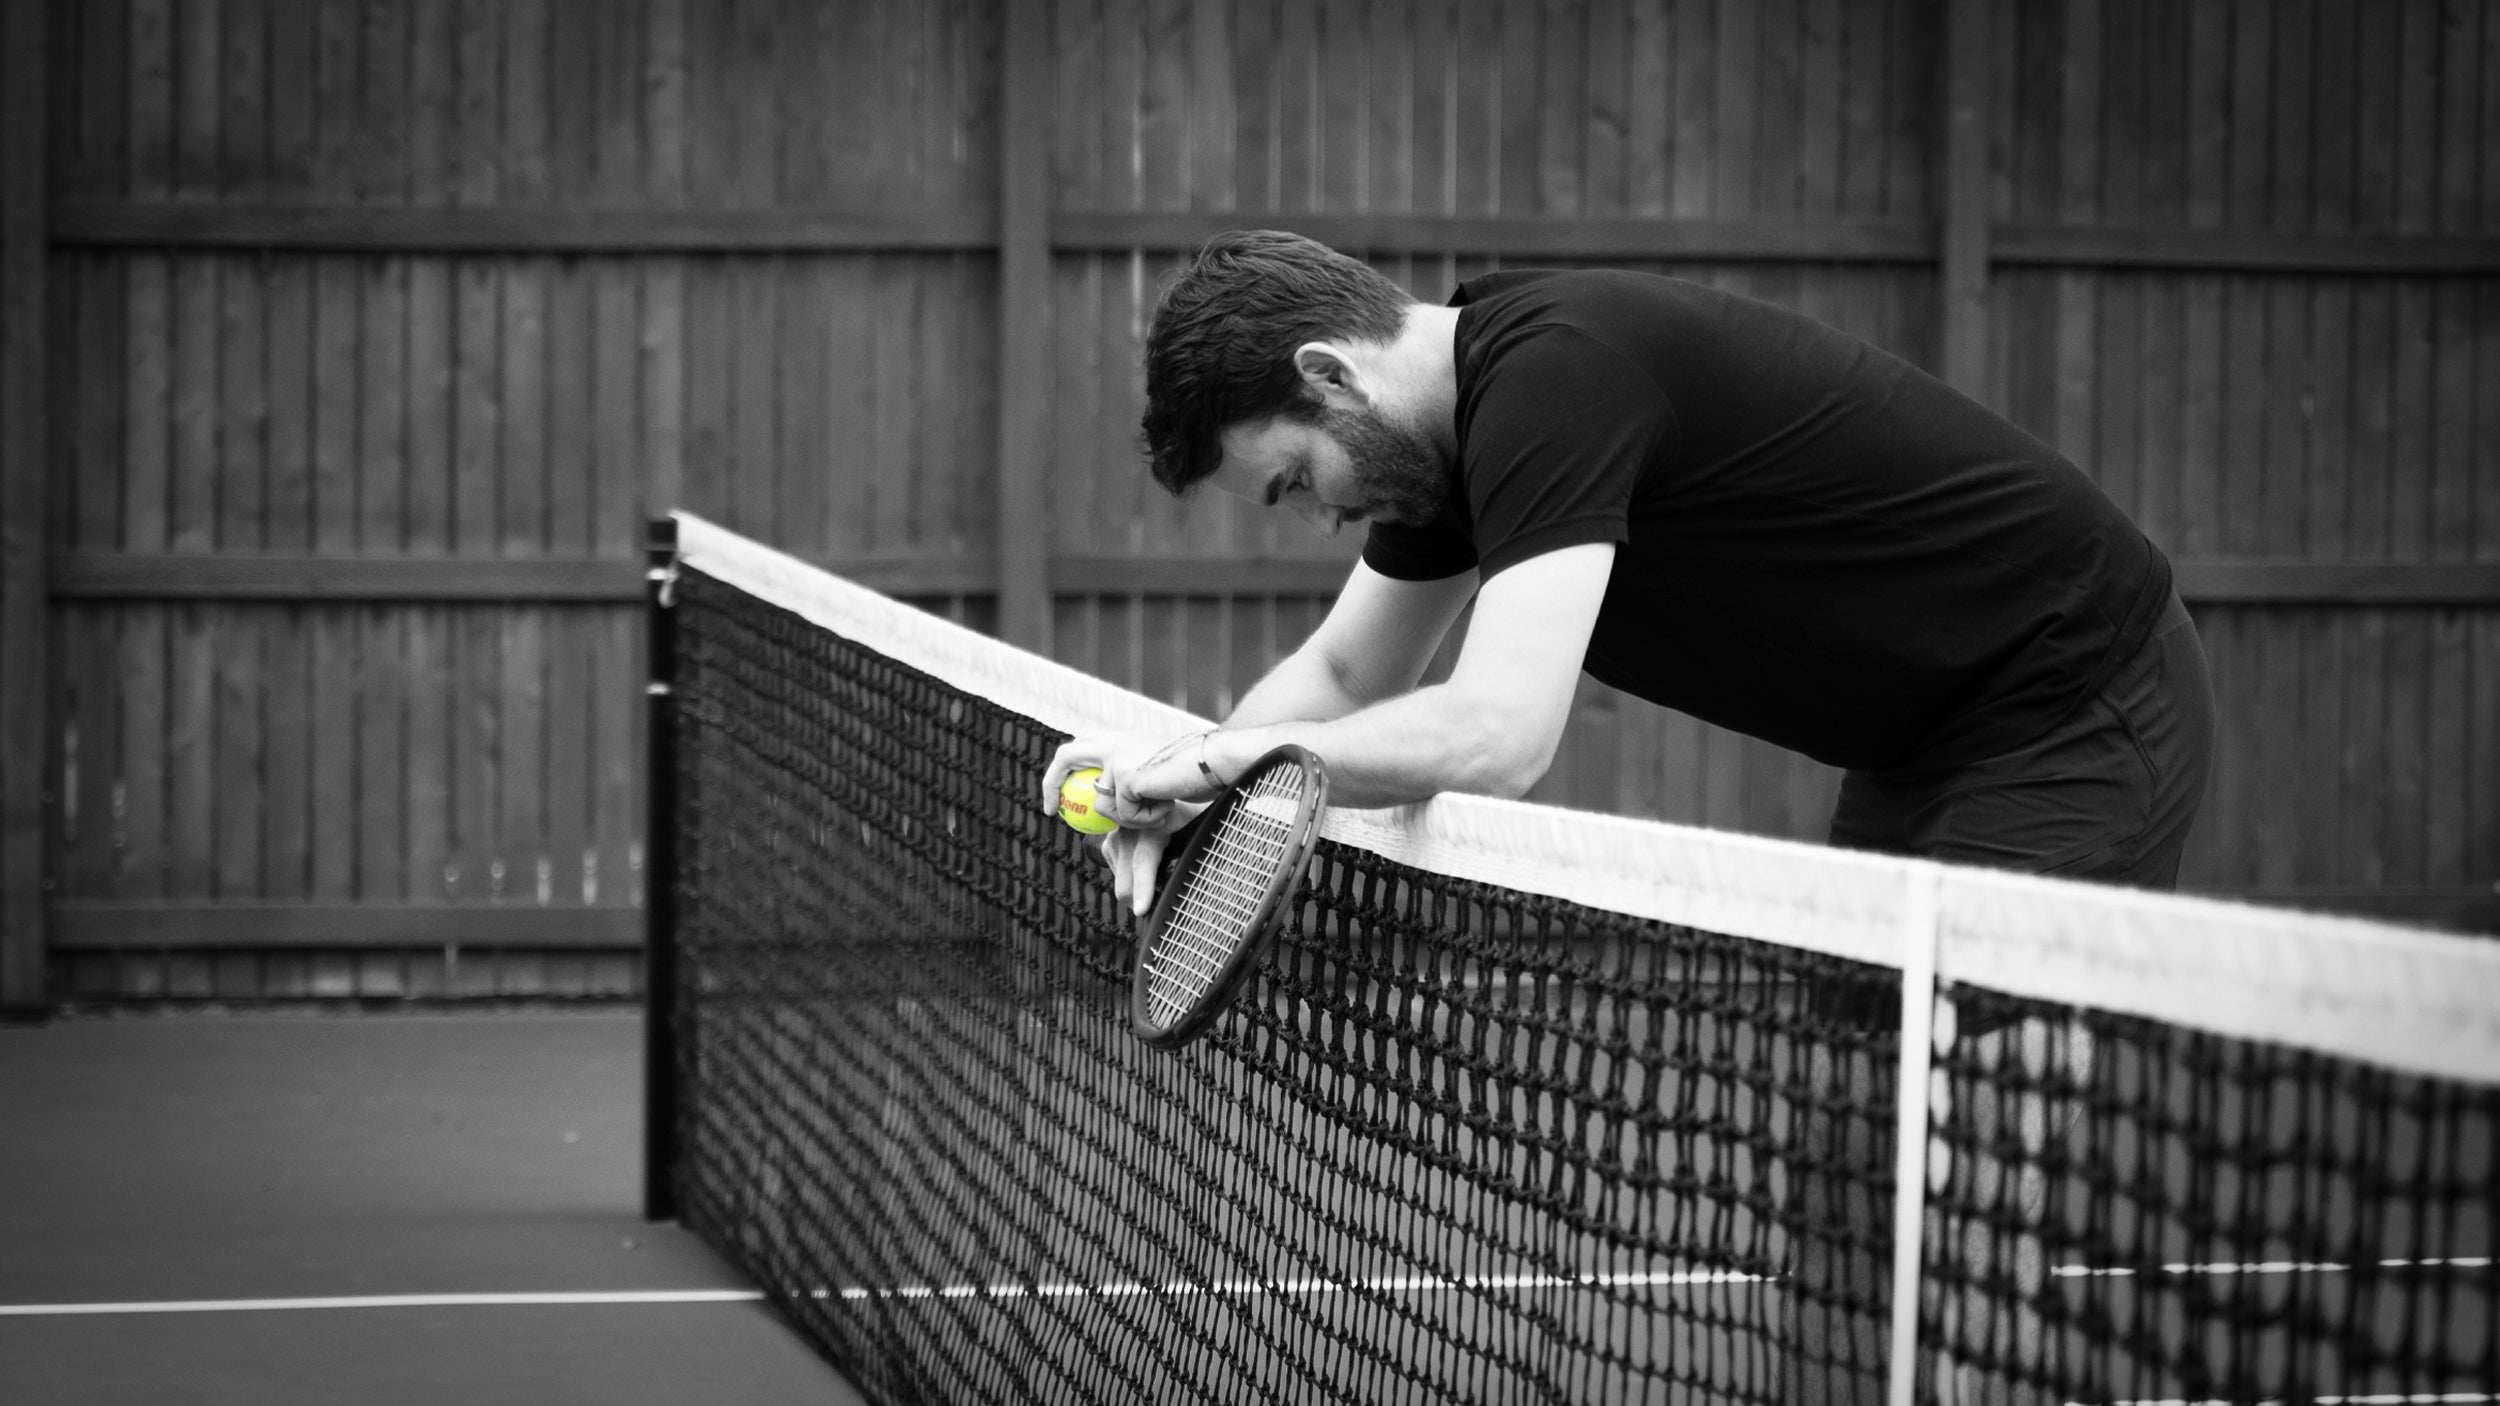 A player slumped over the net holding his racket and a tennis ball, experiencing discomfort.